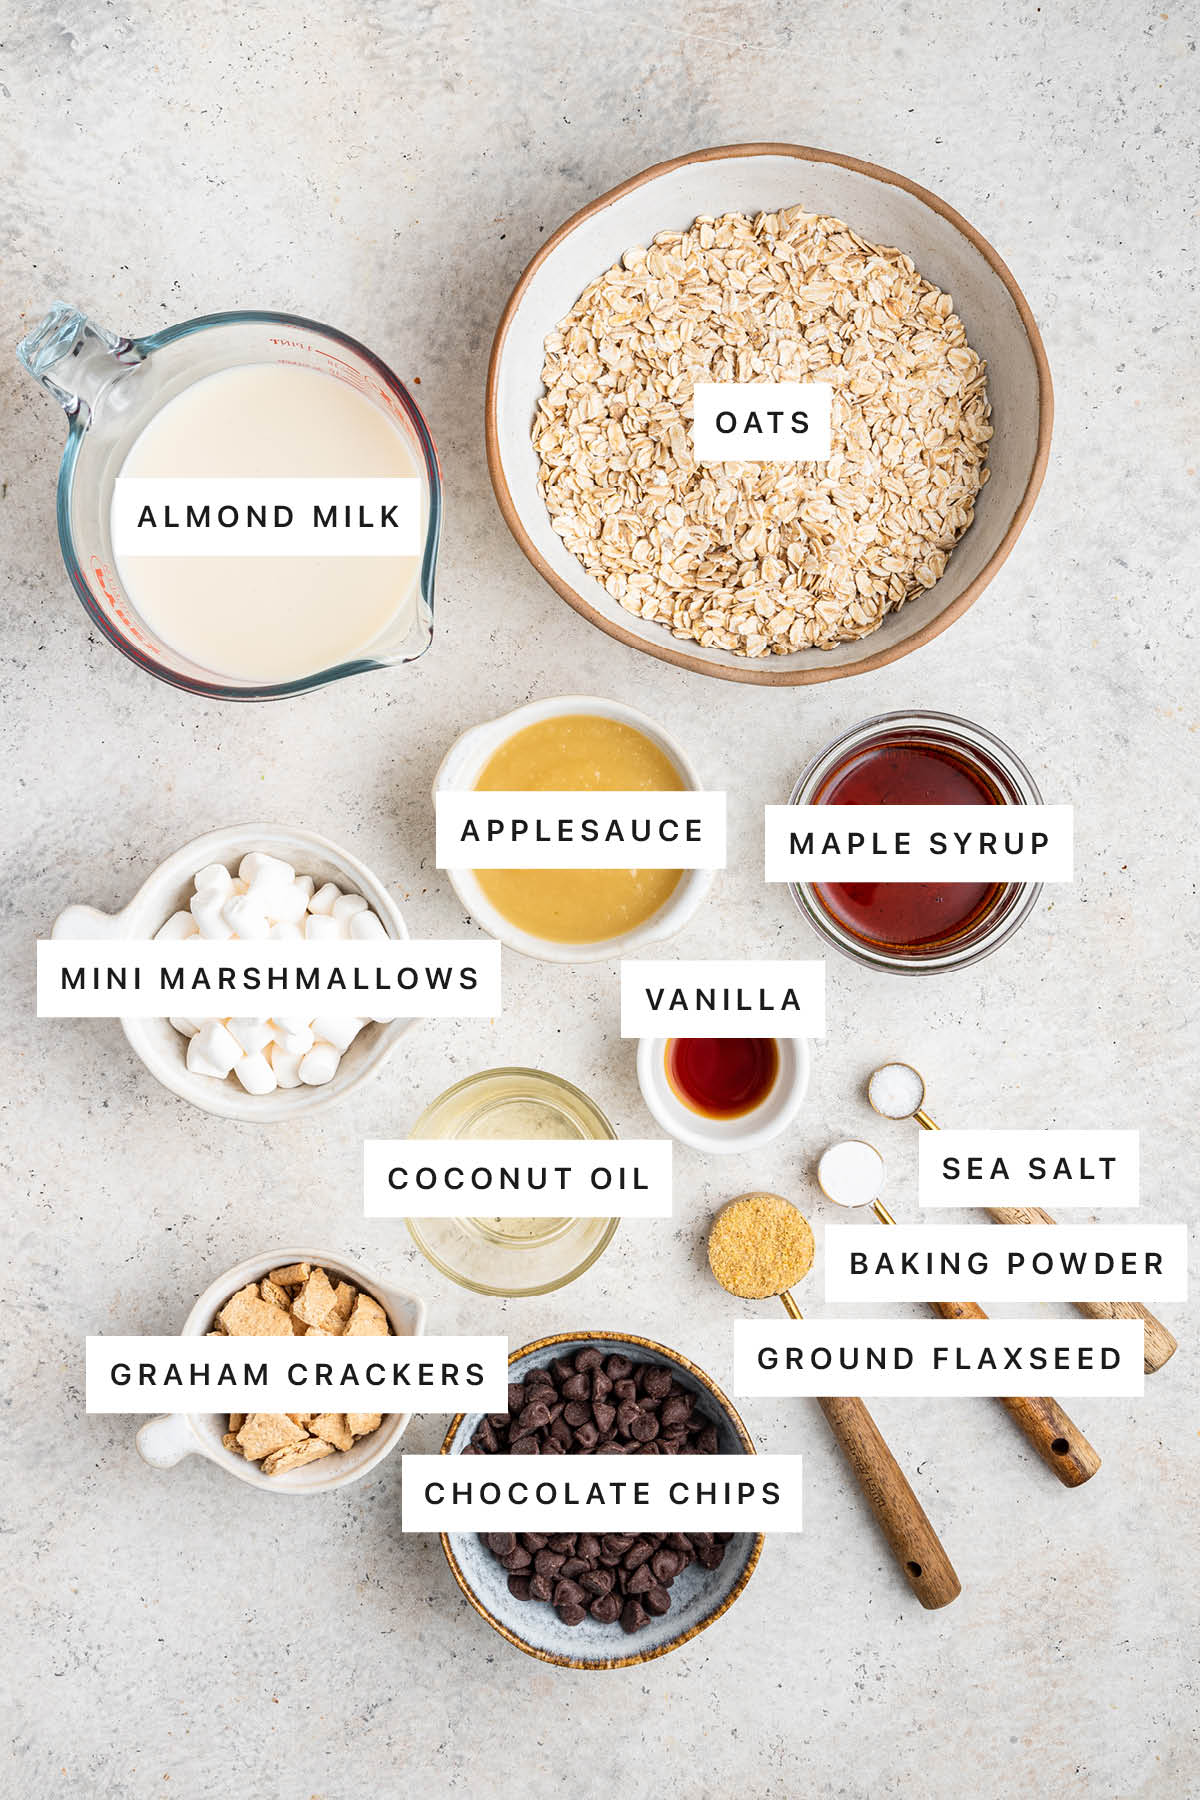 Ingredients measured out to make S'mores Baked Oatmeal: almond milk, oats, applesauce, maple syrup, mini marshmallows, vanilla, coconut oil, sea salt, baking powder, ground flaxseed, graham crackers and chocolate chips.